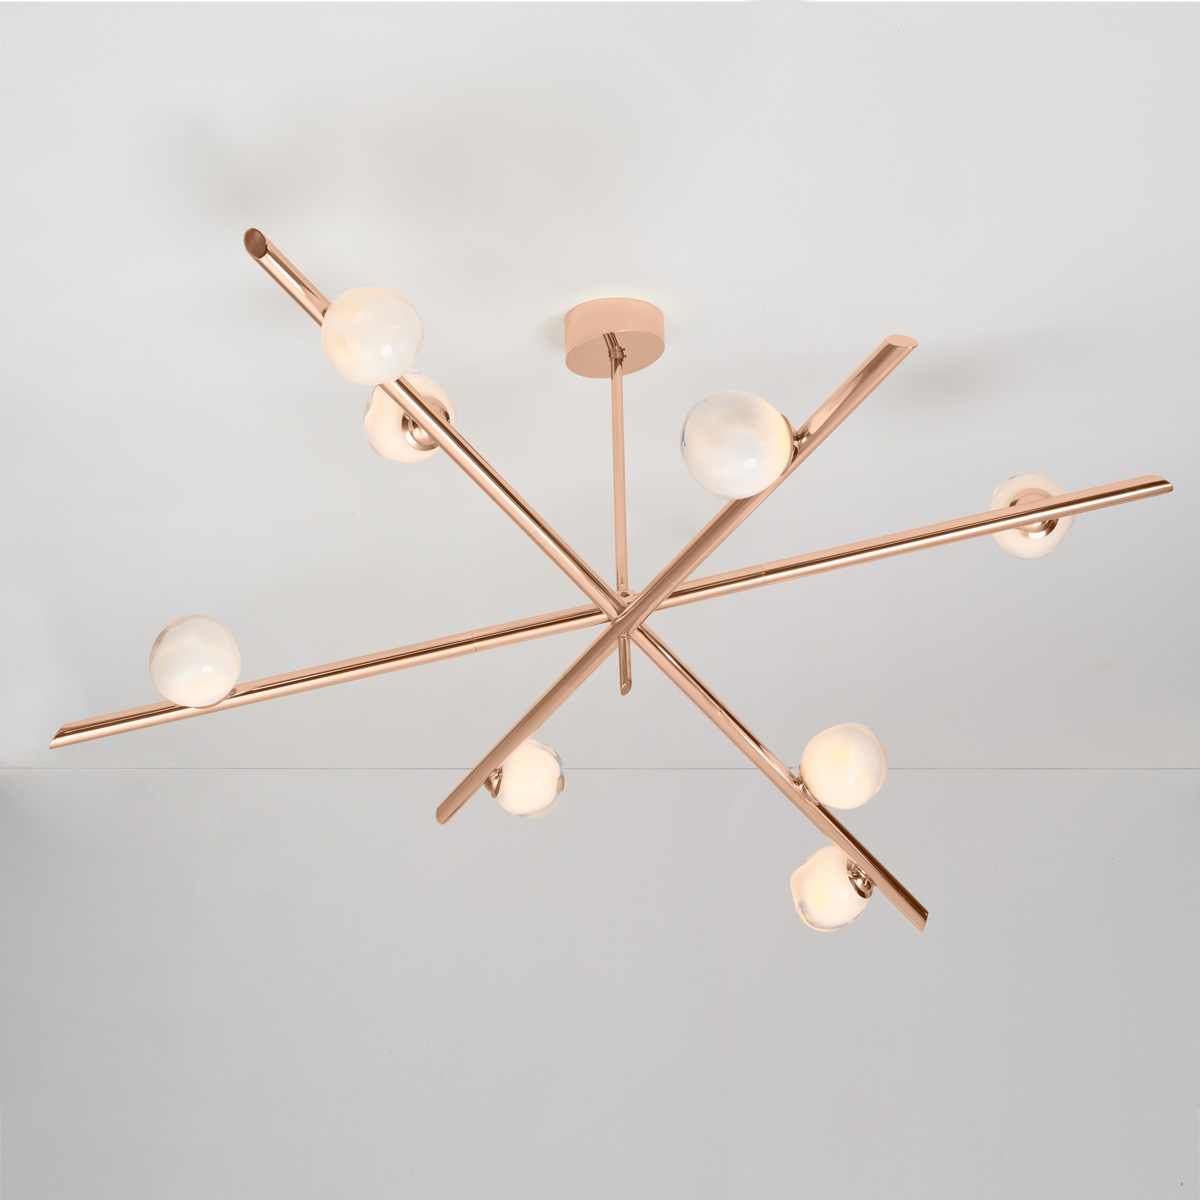 antares x3 ceiling light by gaspare asaro